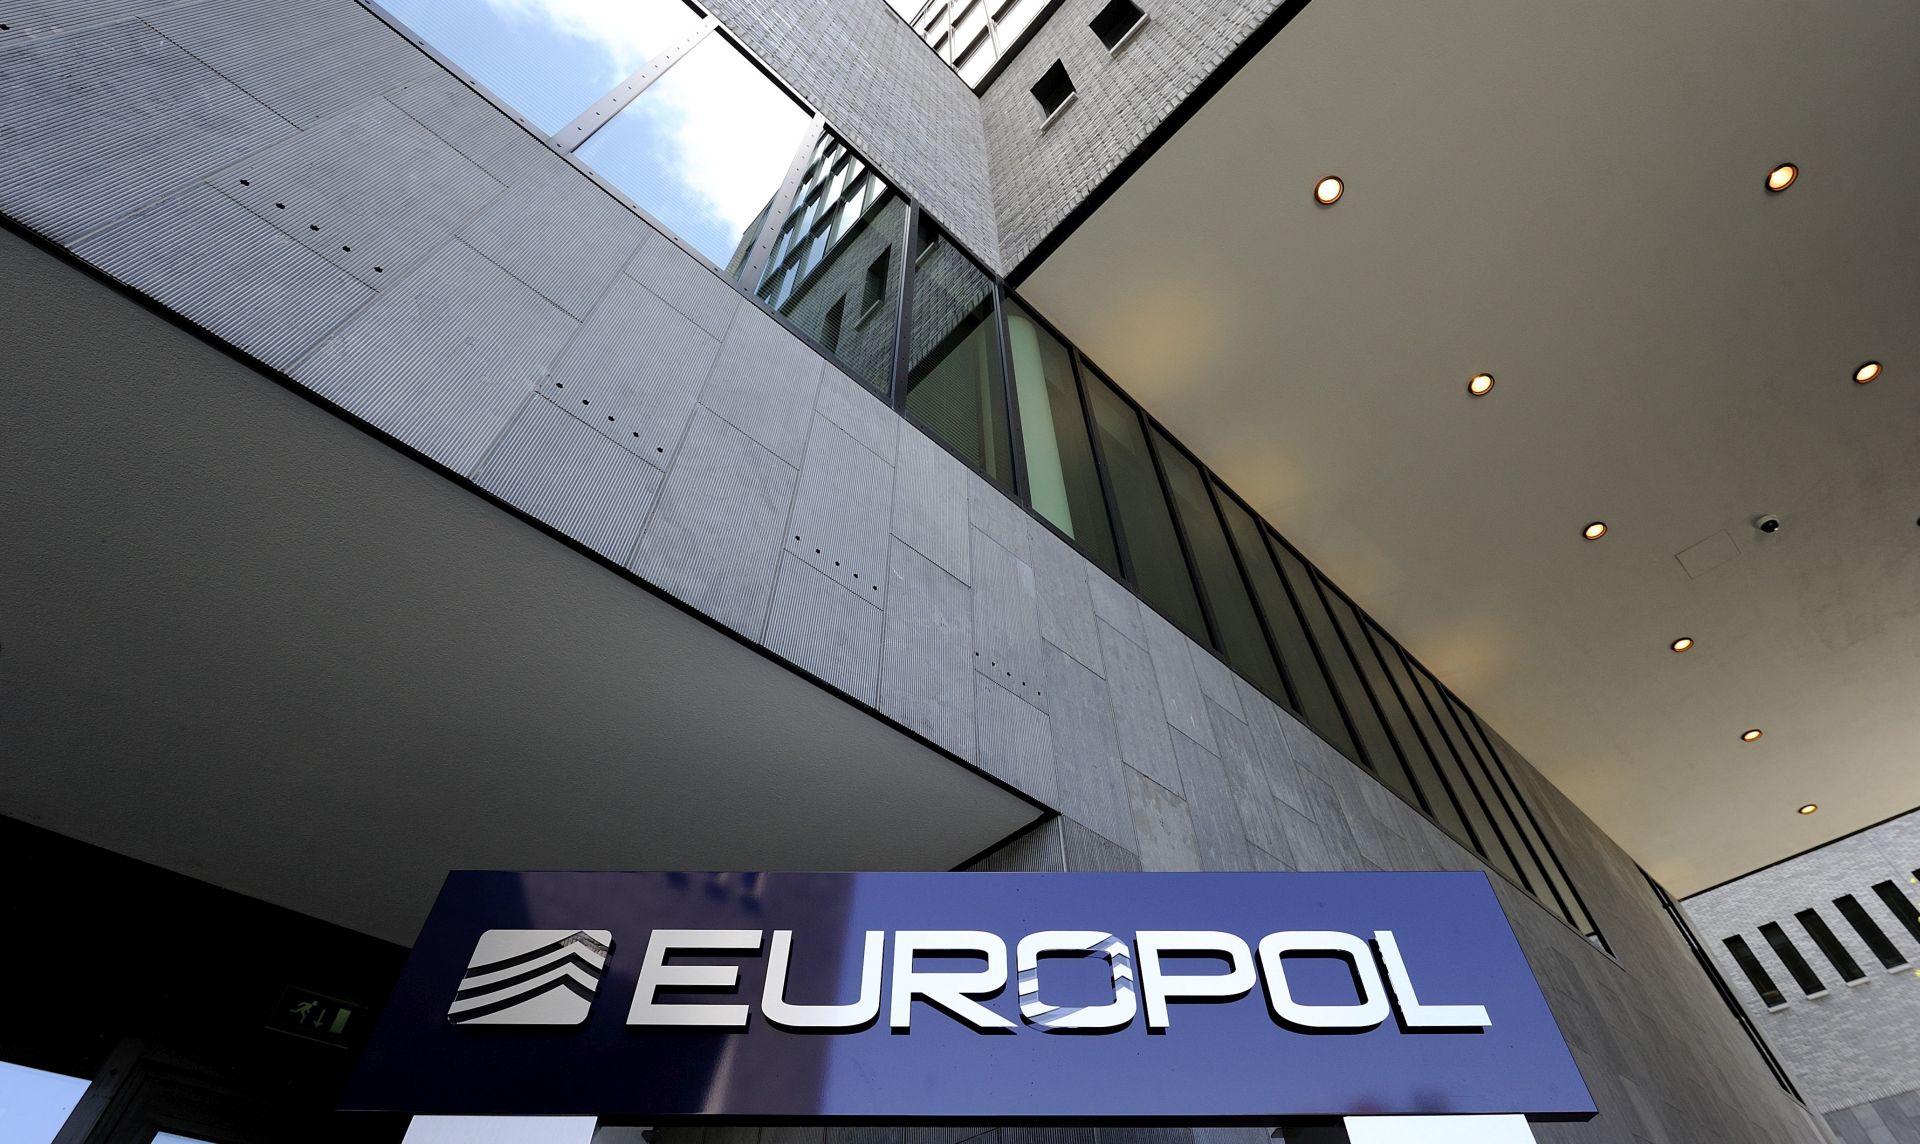 epa05964226 (FILE) - An exterior view of the new Europol headquarters, the alliance of the European Union police and a multinational research organization, in The Hague, The Netherlands 01 July 2011, (reissued 14 May 2017). Media reports on 14 May 2017 state that experts of Europol expect a wave of further attacks on computers with so-called 'Ransomware'. A cyber attack hit at least 150 countries world wide with an estimate 200,000 victims, Europol chief Rob Wainwright was cited as saying in an interview with British broadcaster ITV. It is expected that there are even more attacks on computers recorded at the beginning of the new working week, Wainwright added. The so-called 'WannaCry' ransomware cyber attack hit the computers by encrypting files from affected computer units and demanded 300 US dollars through bitcoin to decrypt the files.  EPA/LEX VAN LIESHOUT